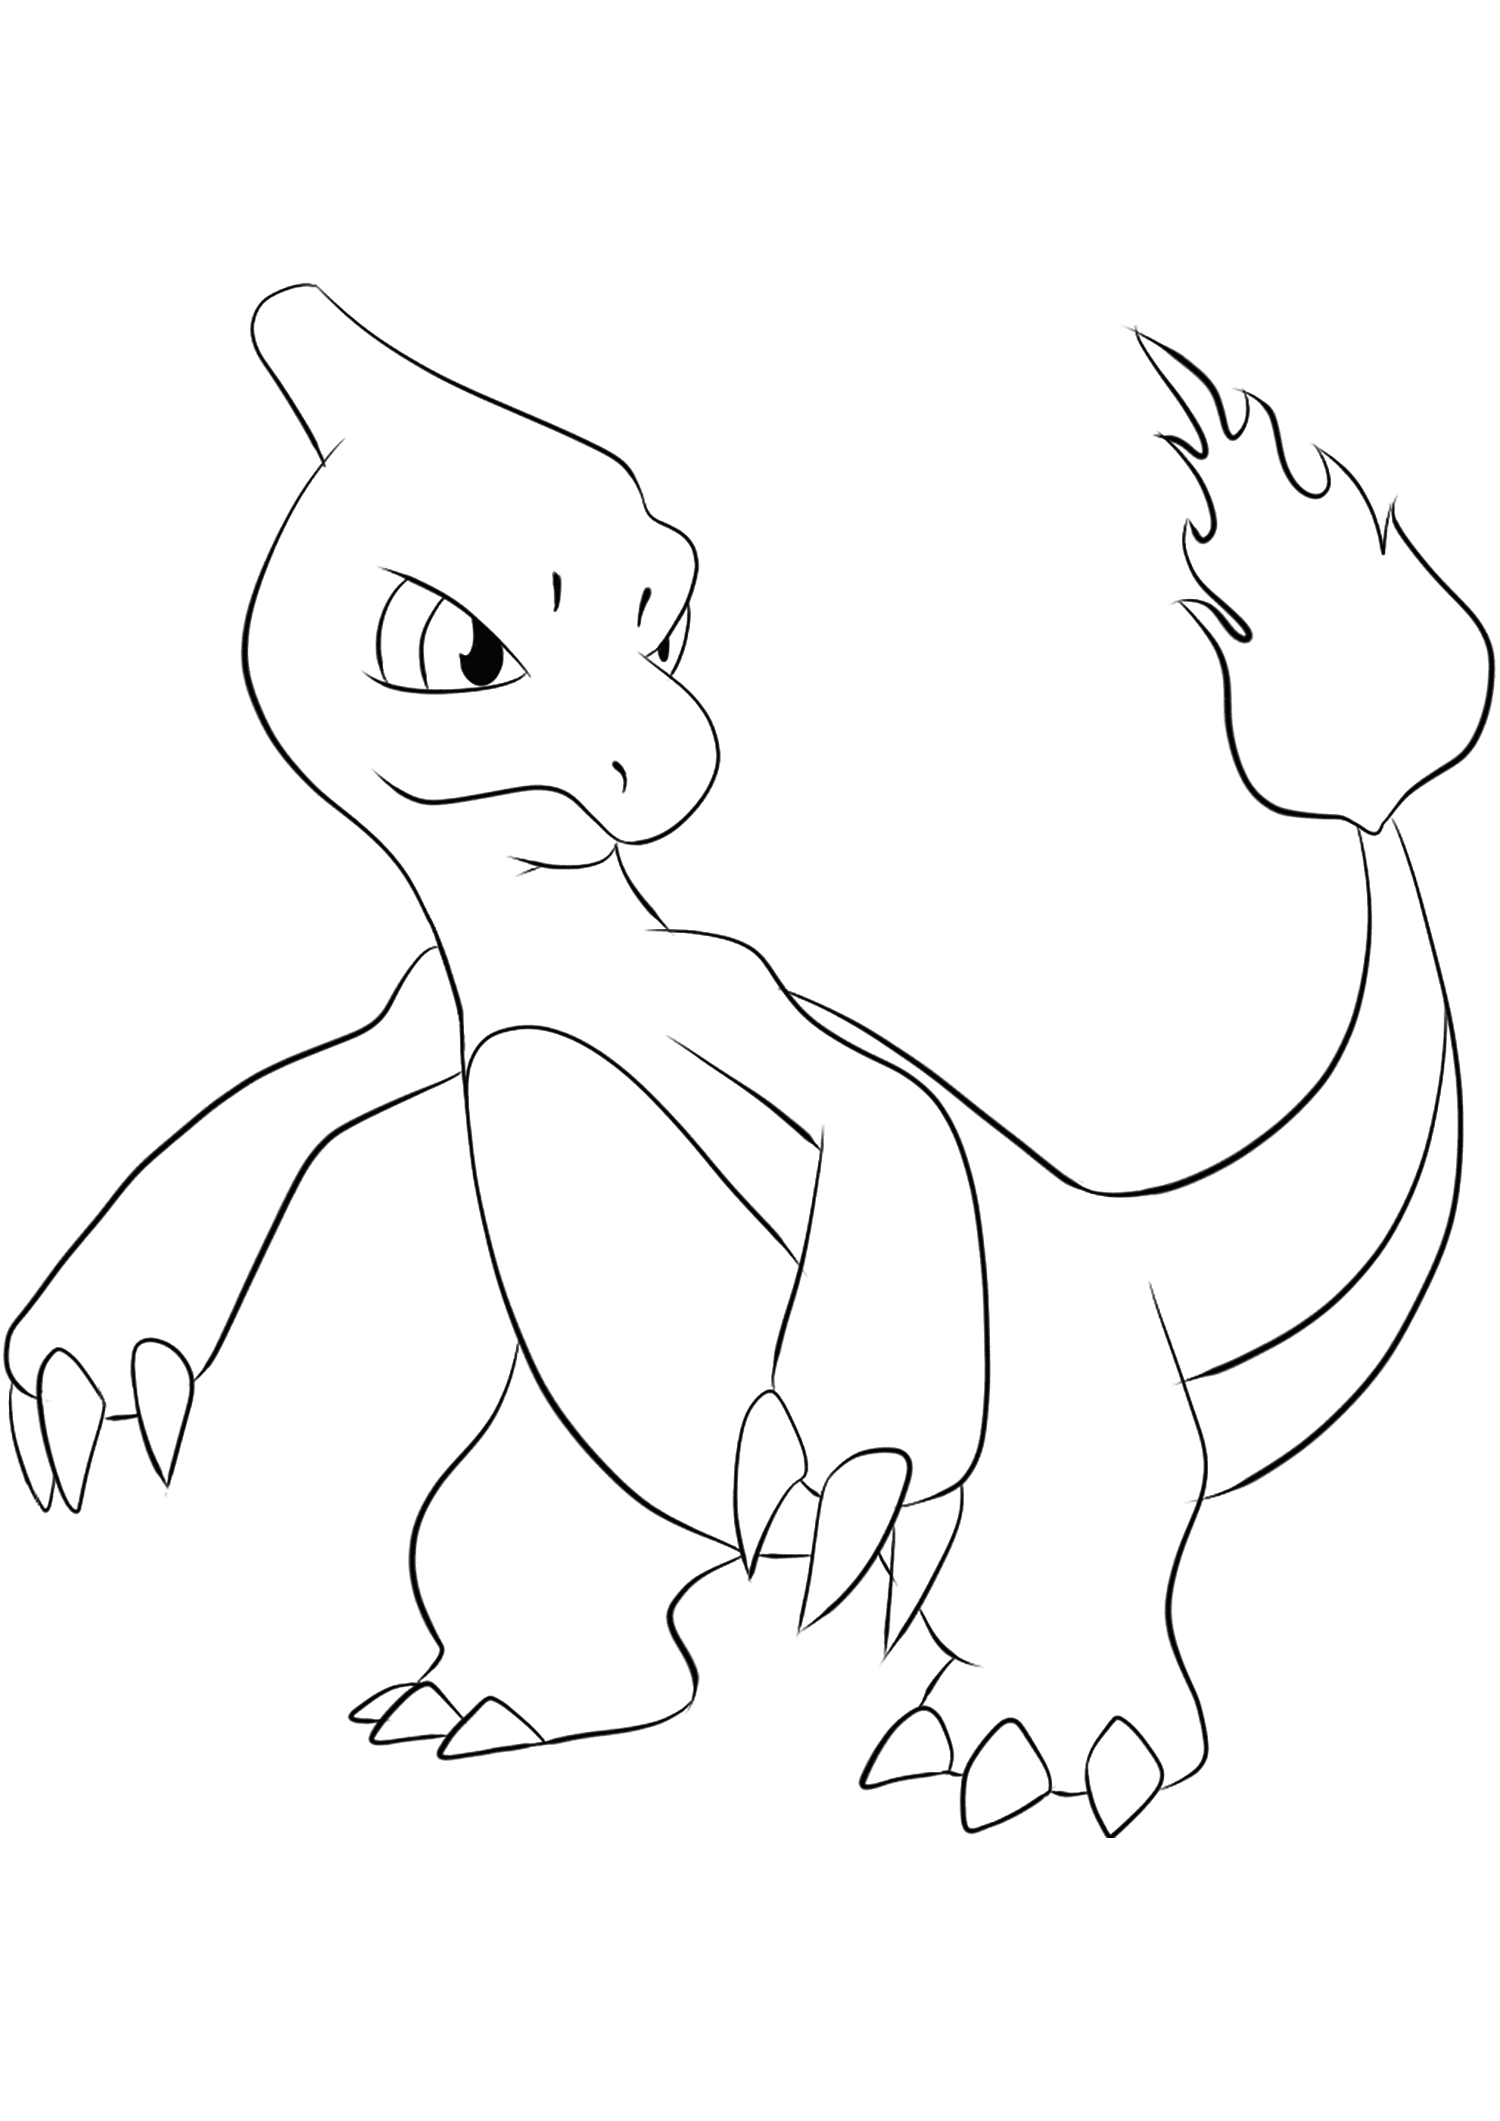 Charmeleon (No.05). Charmeleon Coloring page, Generation I Pokemon of type FireOriginal image credit: Pokemon linearts by Lilly Gerbil'font-size:smaller;color:gray'>Permission: All rights reserved © Pokemon company and Ken Sugimori.